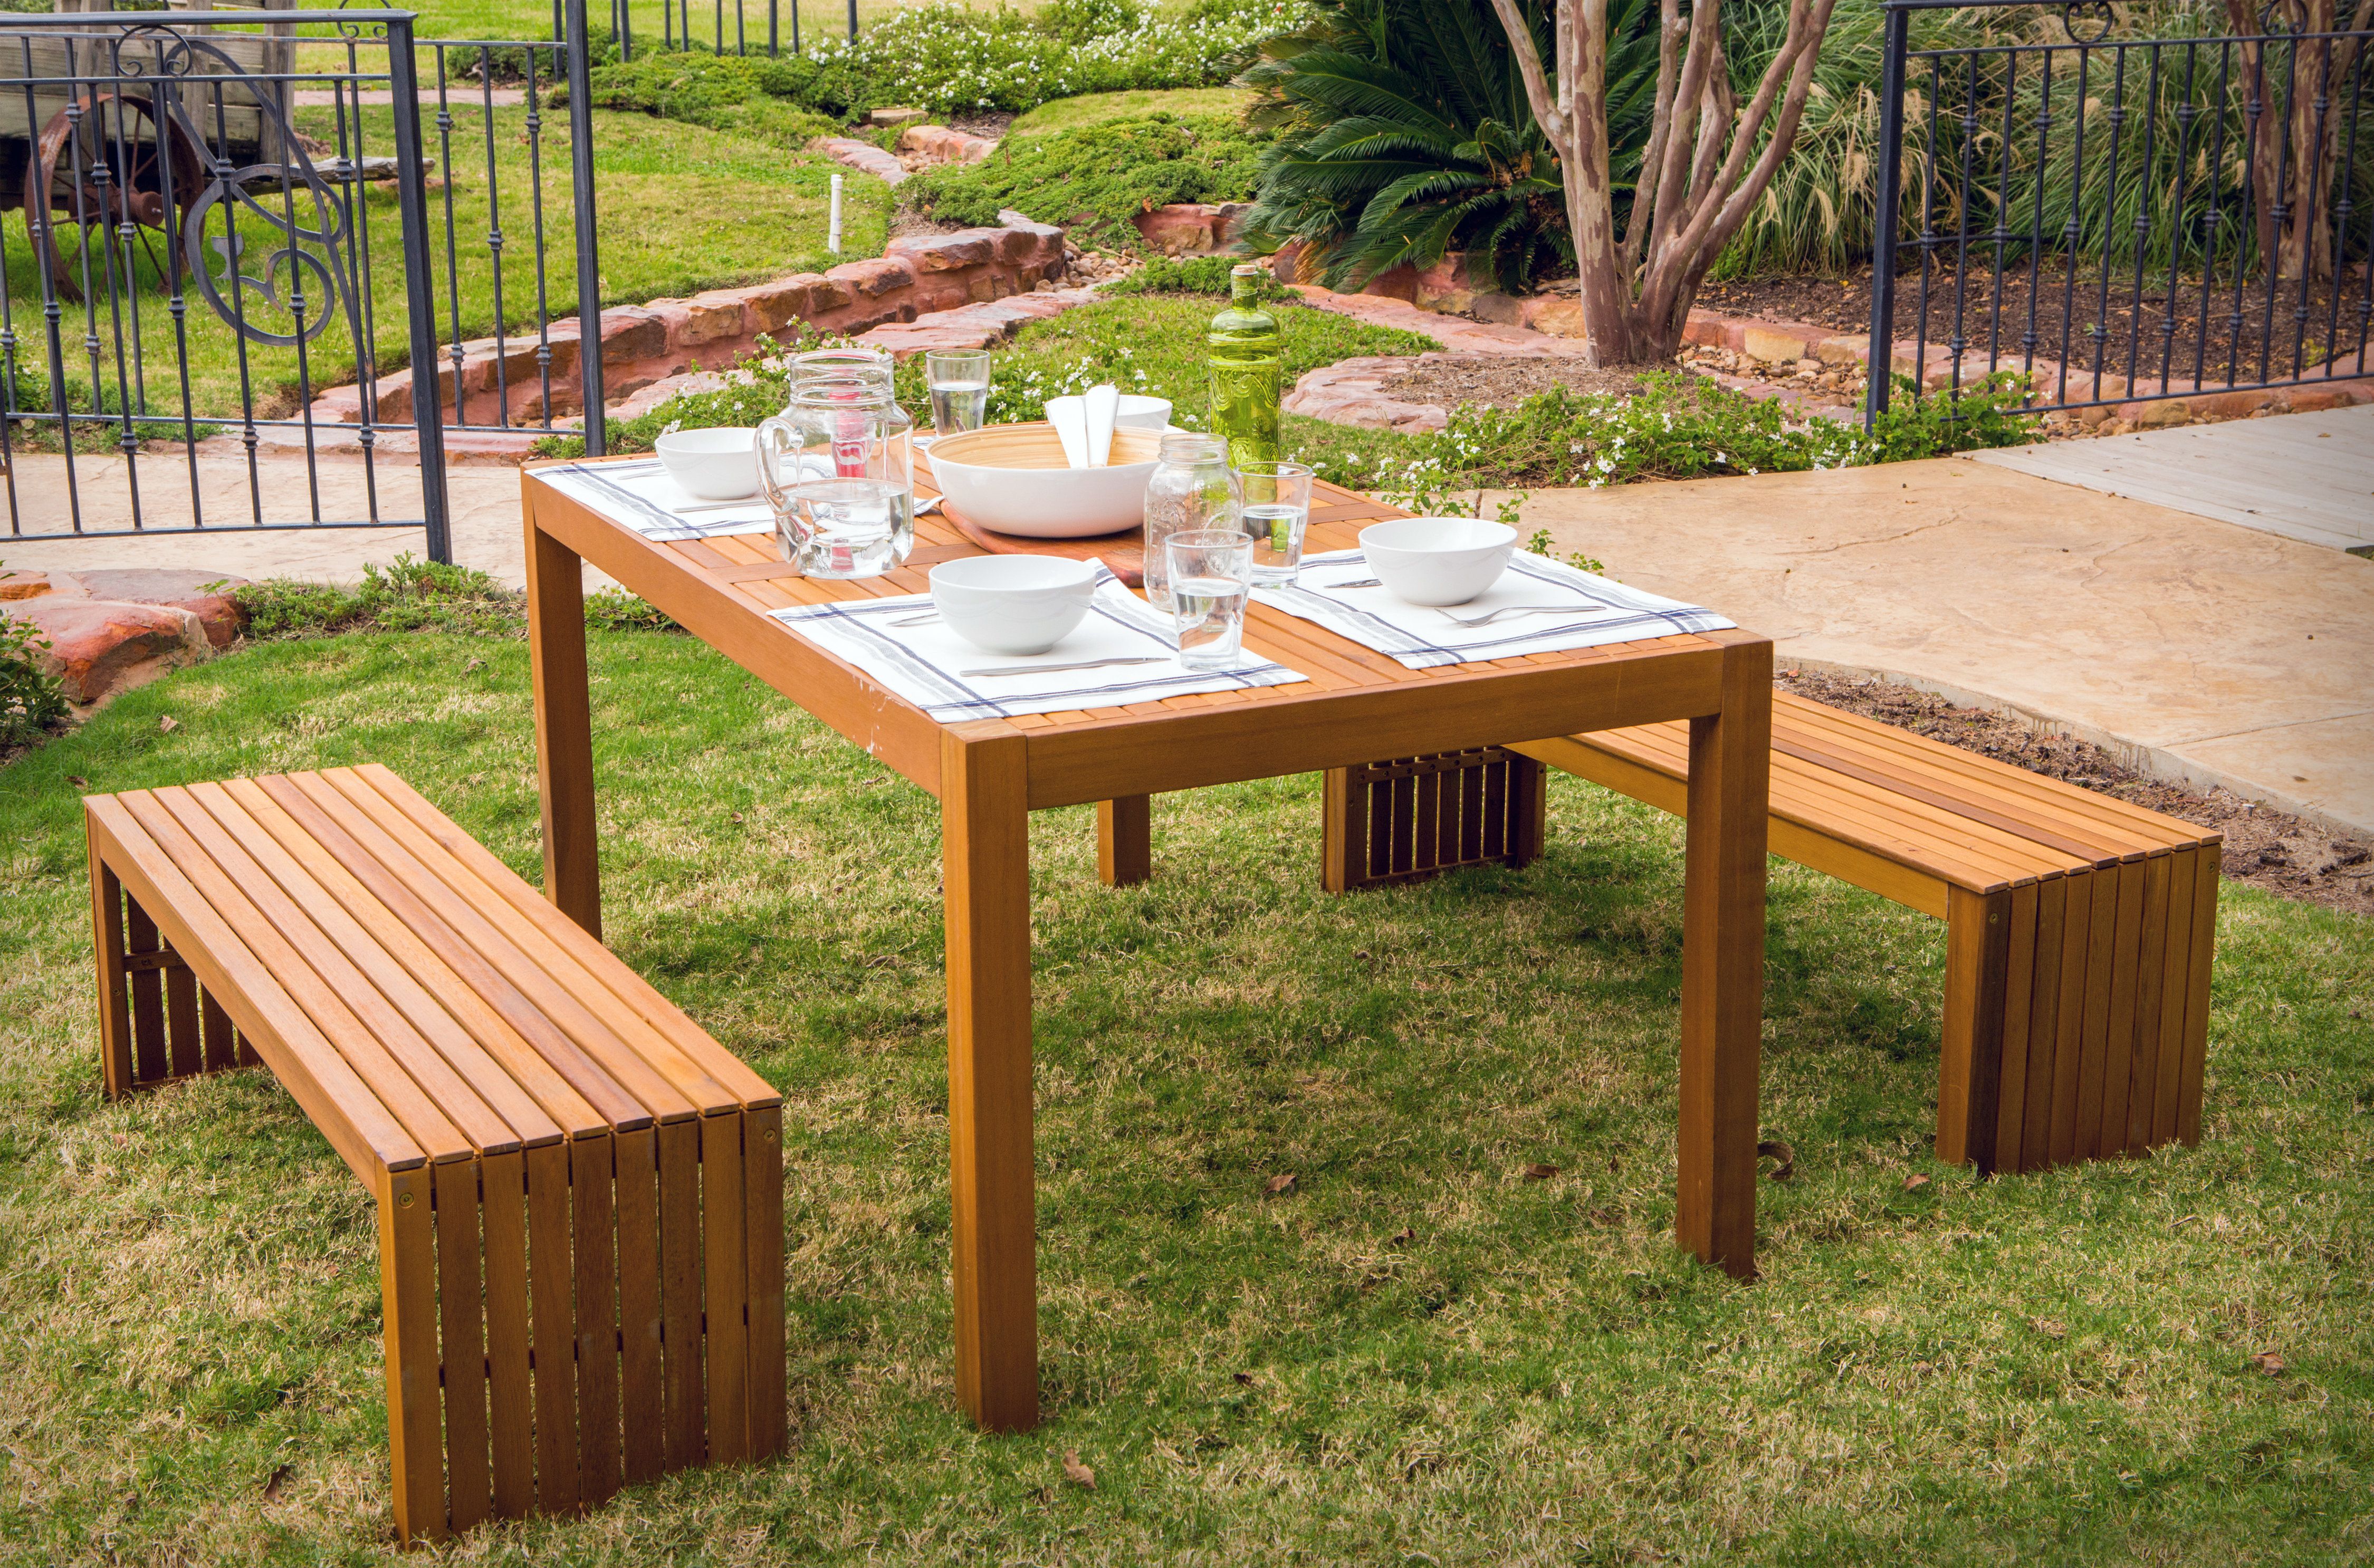 Stylish Picnic Tables For Outdoor Dining